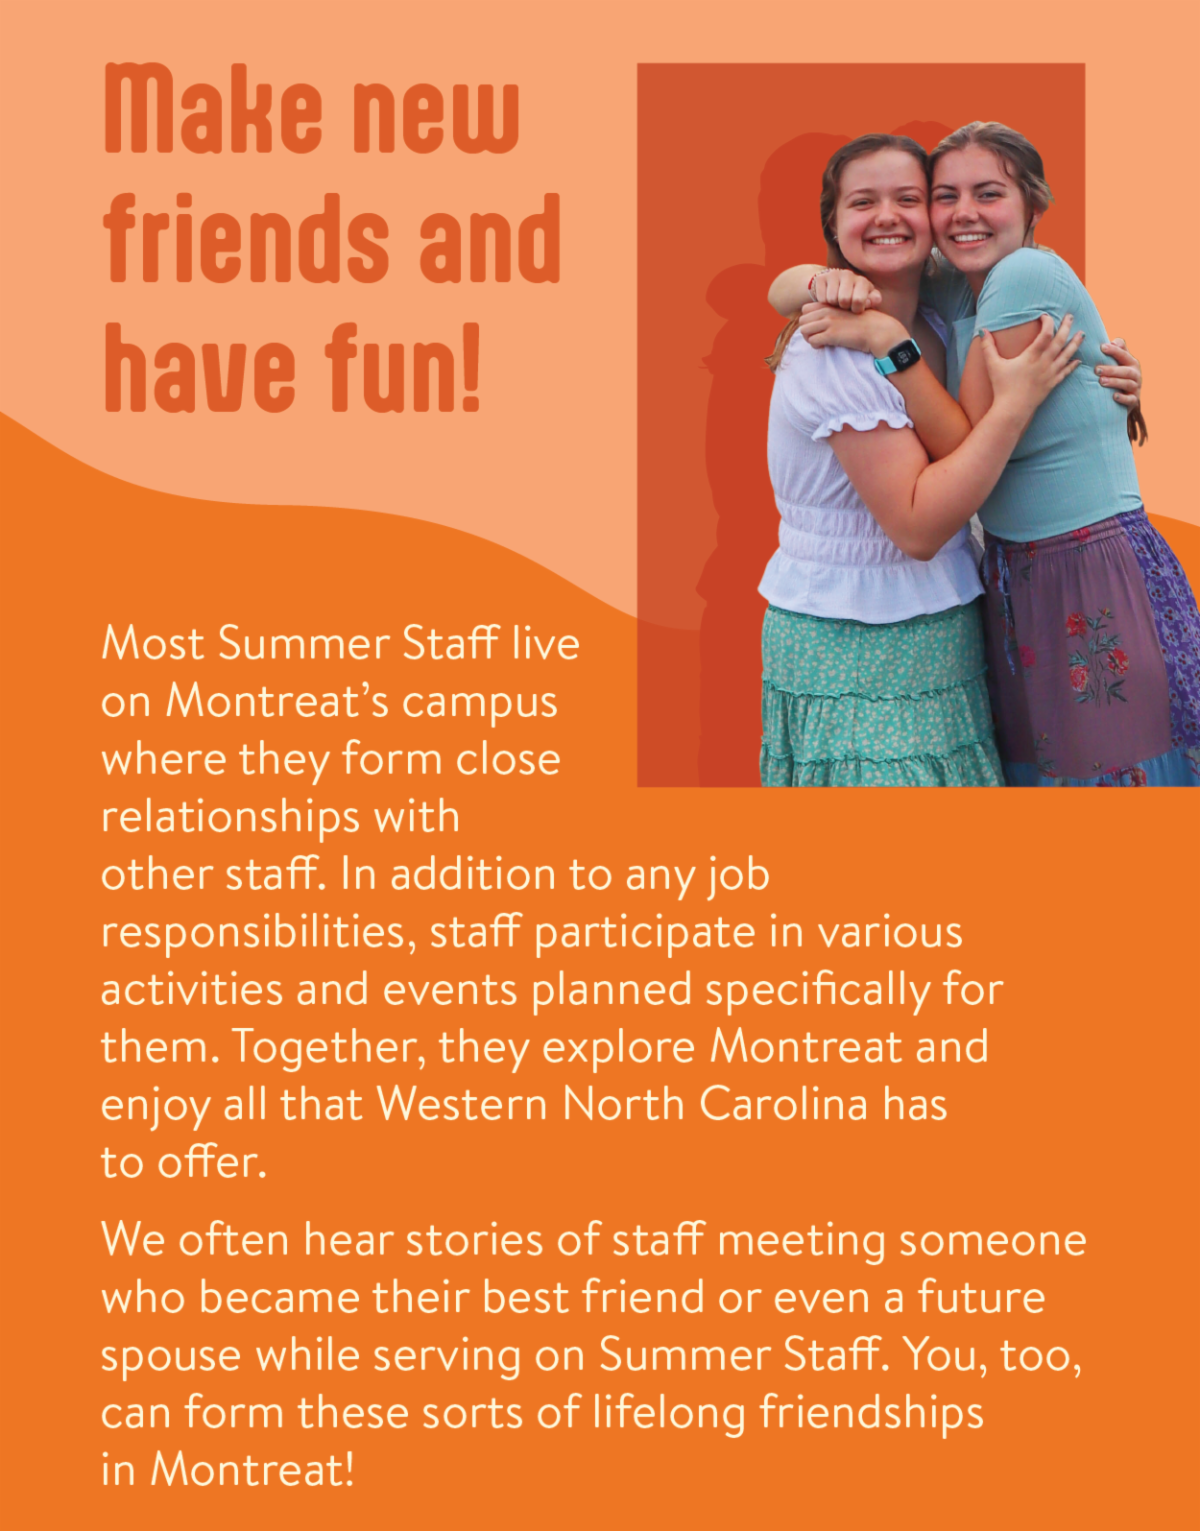 Make new friends and have fun! - Most Summer Staff live on Montreat’s campus where they form close relationships with other staff. In addition to any job responsibilities, staff participate in various activities and events planned specifically for them. Together, they explore Montreat and enjoy all that Western North Carolina has to offer. We often hear stories of staff meeting someone who became their best friend or even a future spouse while serving on Summer Staff. You, too, can form these sorts of lifelong friendships in Montreat!